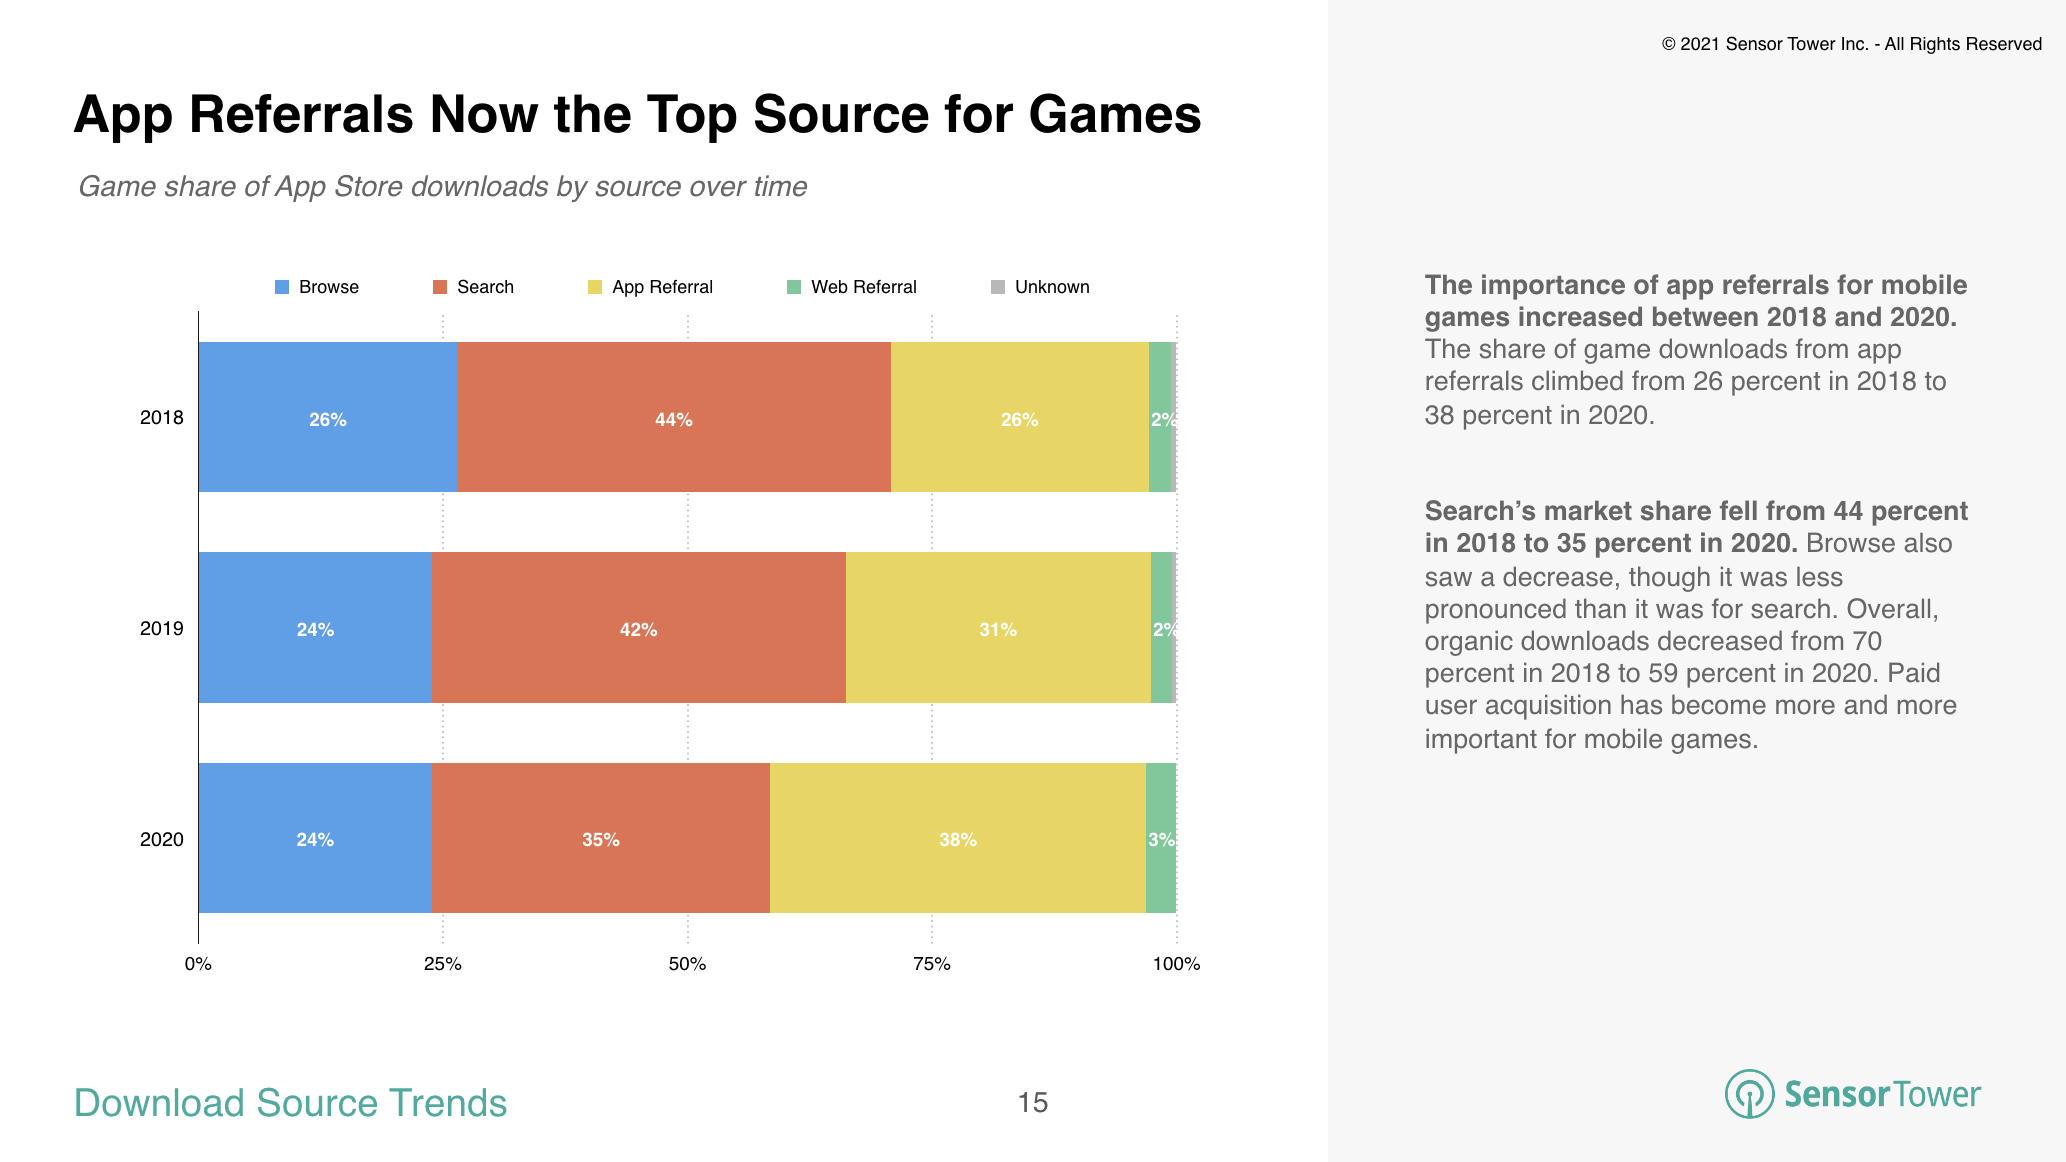 App referrals became the top source of mobile game downloads in 2020.